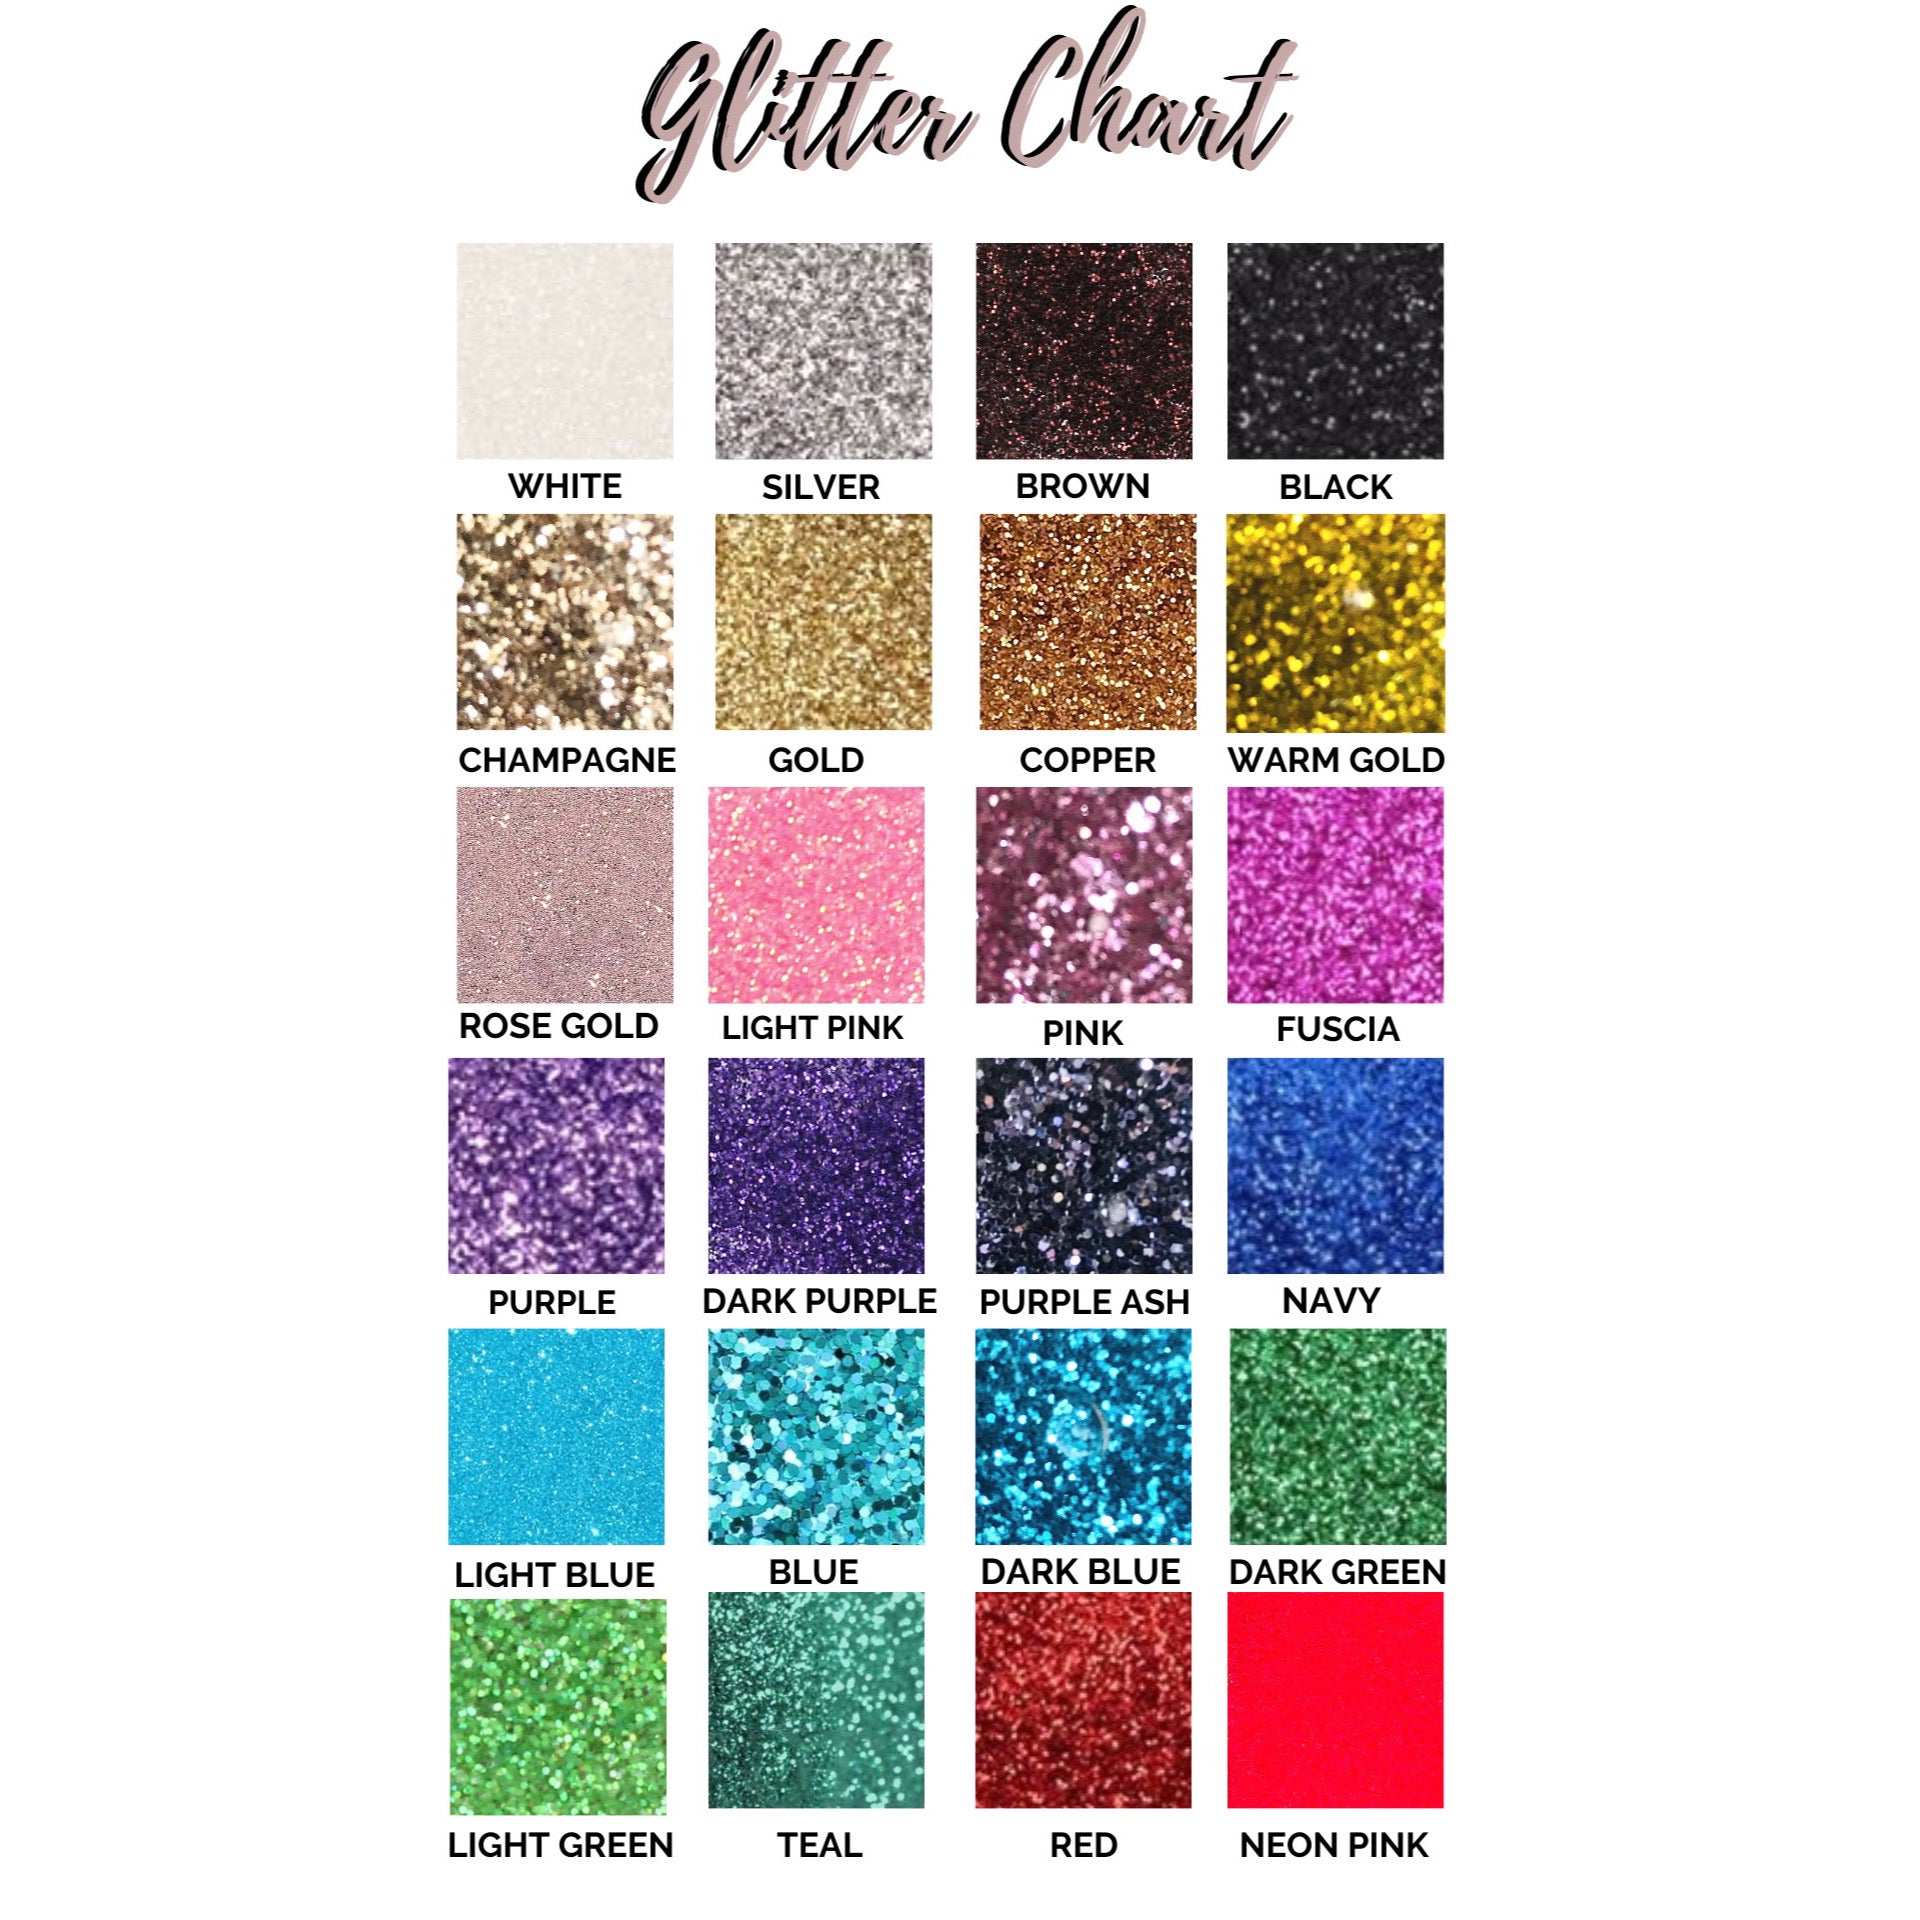 Glitter Chart showcasing all the glitter colour options available.